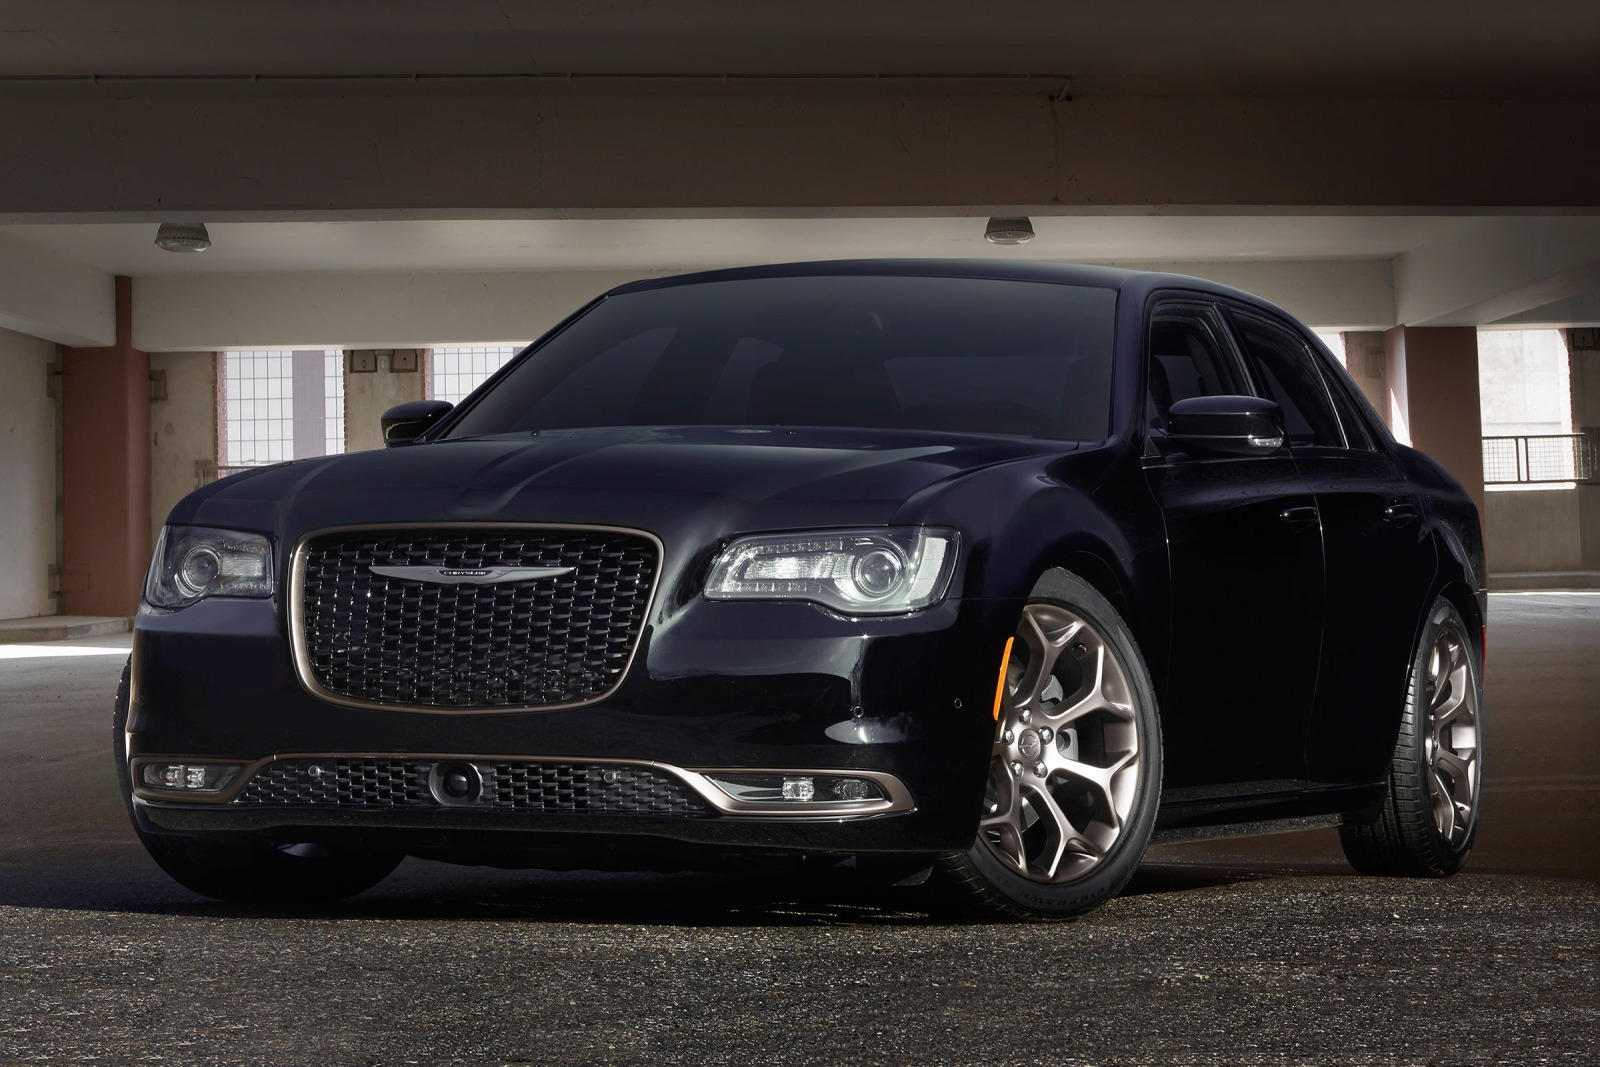 Chrysler 300 Build And Price How do you Price a Switches?